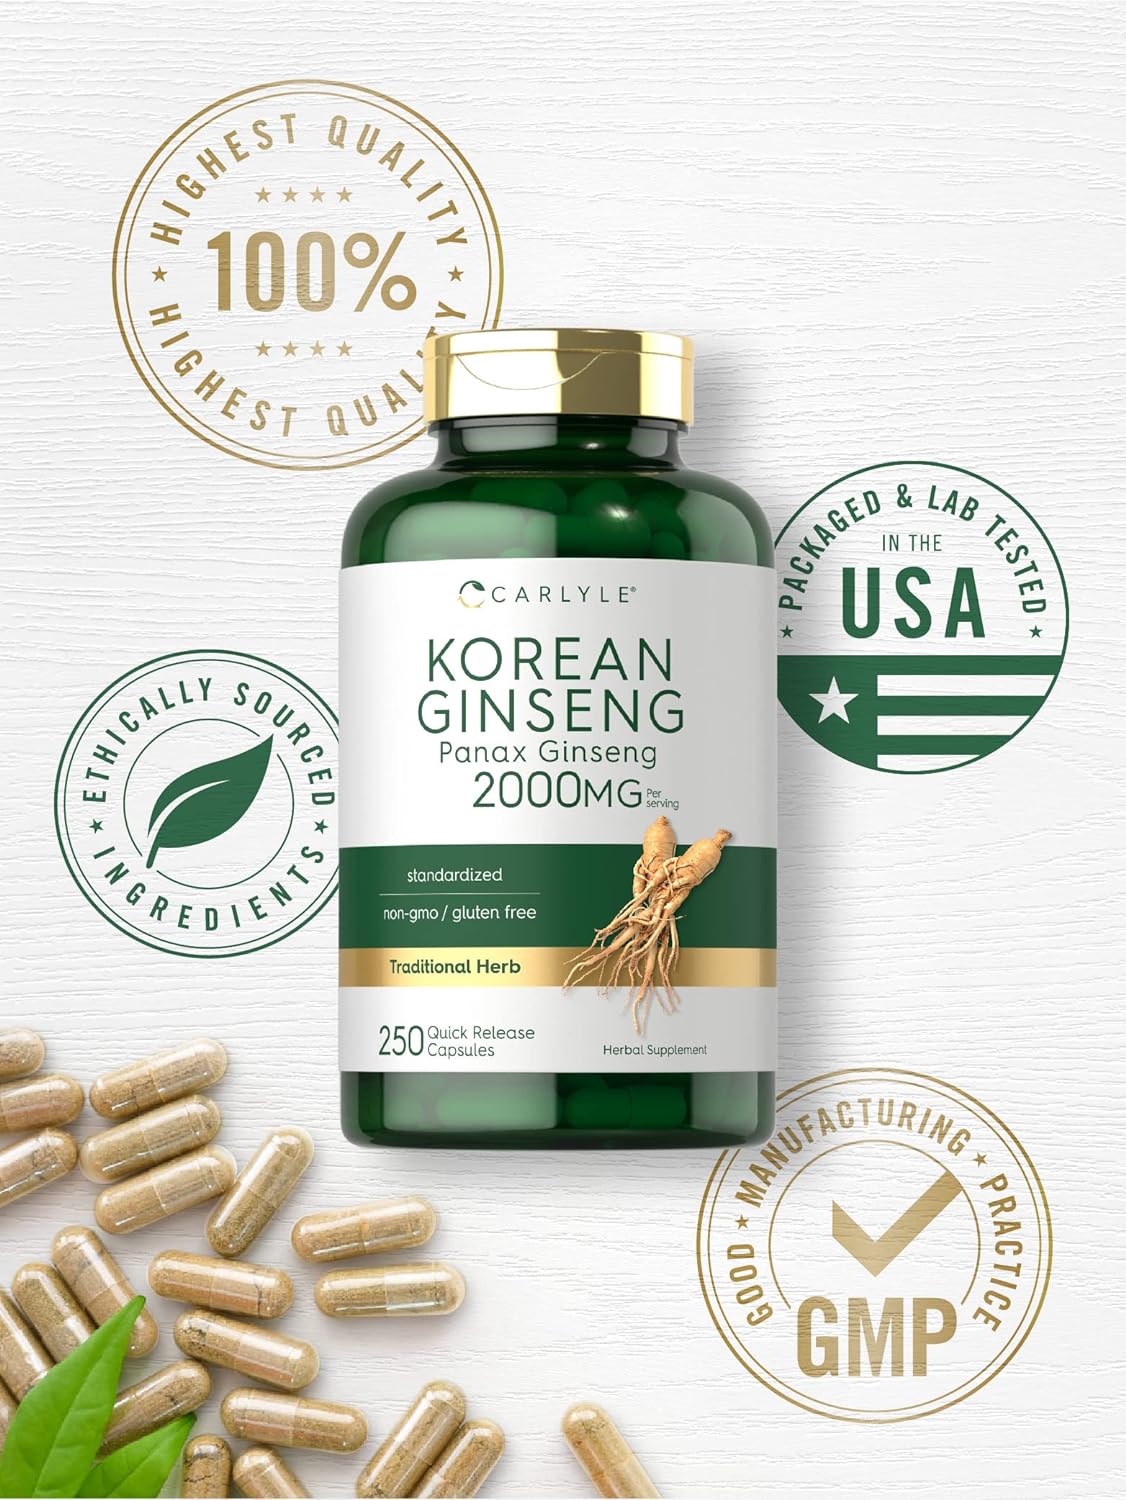 Carlyle Korean Ginseng Extract Capsules 2000 mg | 250 Capsules | Non-GMO and Gluten Free Formula | Standardized Panax Ginseng Supplement : Health & Household